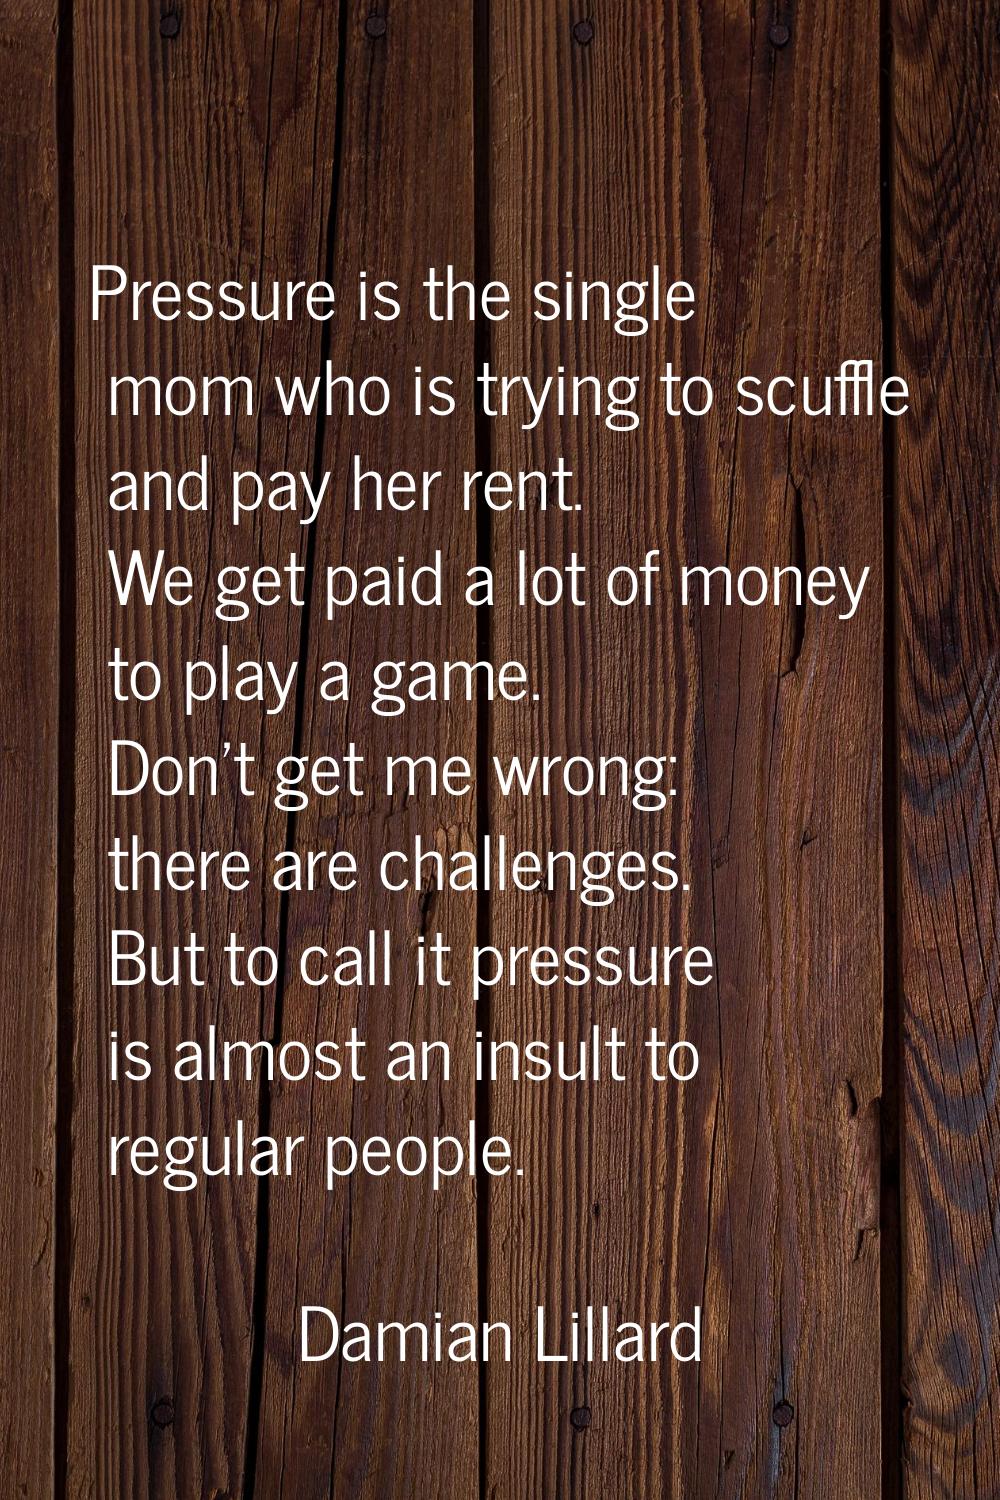 Pressure is the single mom who is trying to scuffle and pay her rent. We get paid a lot of money to